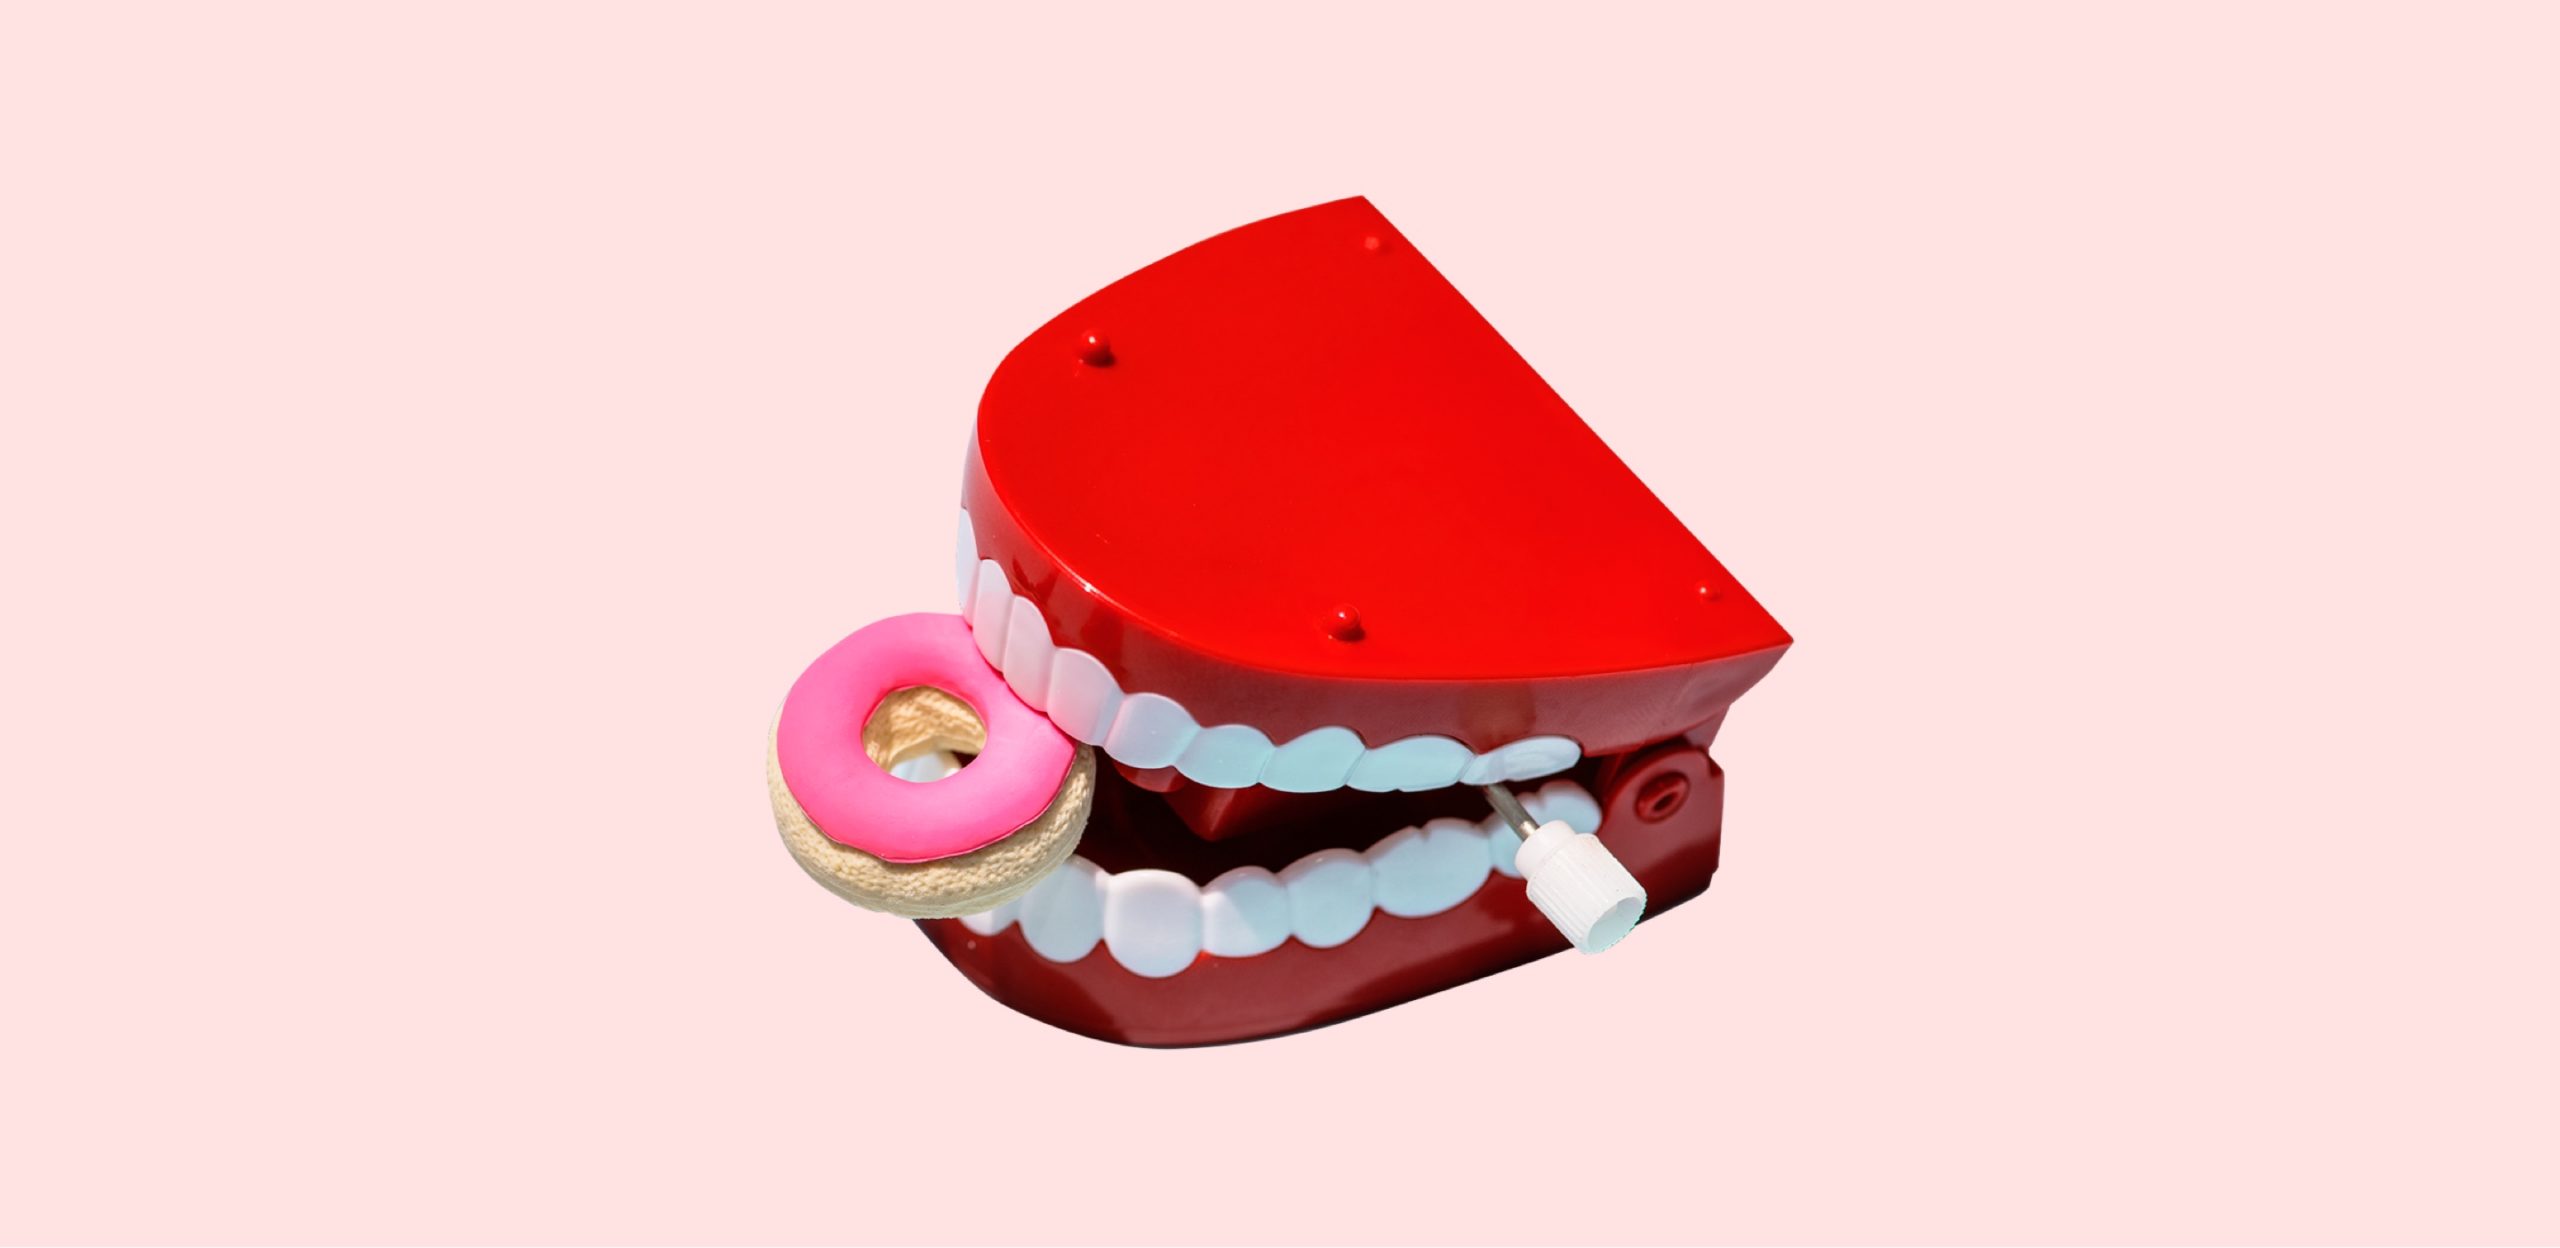 jaw with toy teeth biting into a toy donut